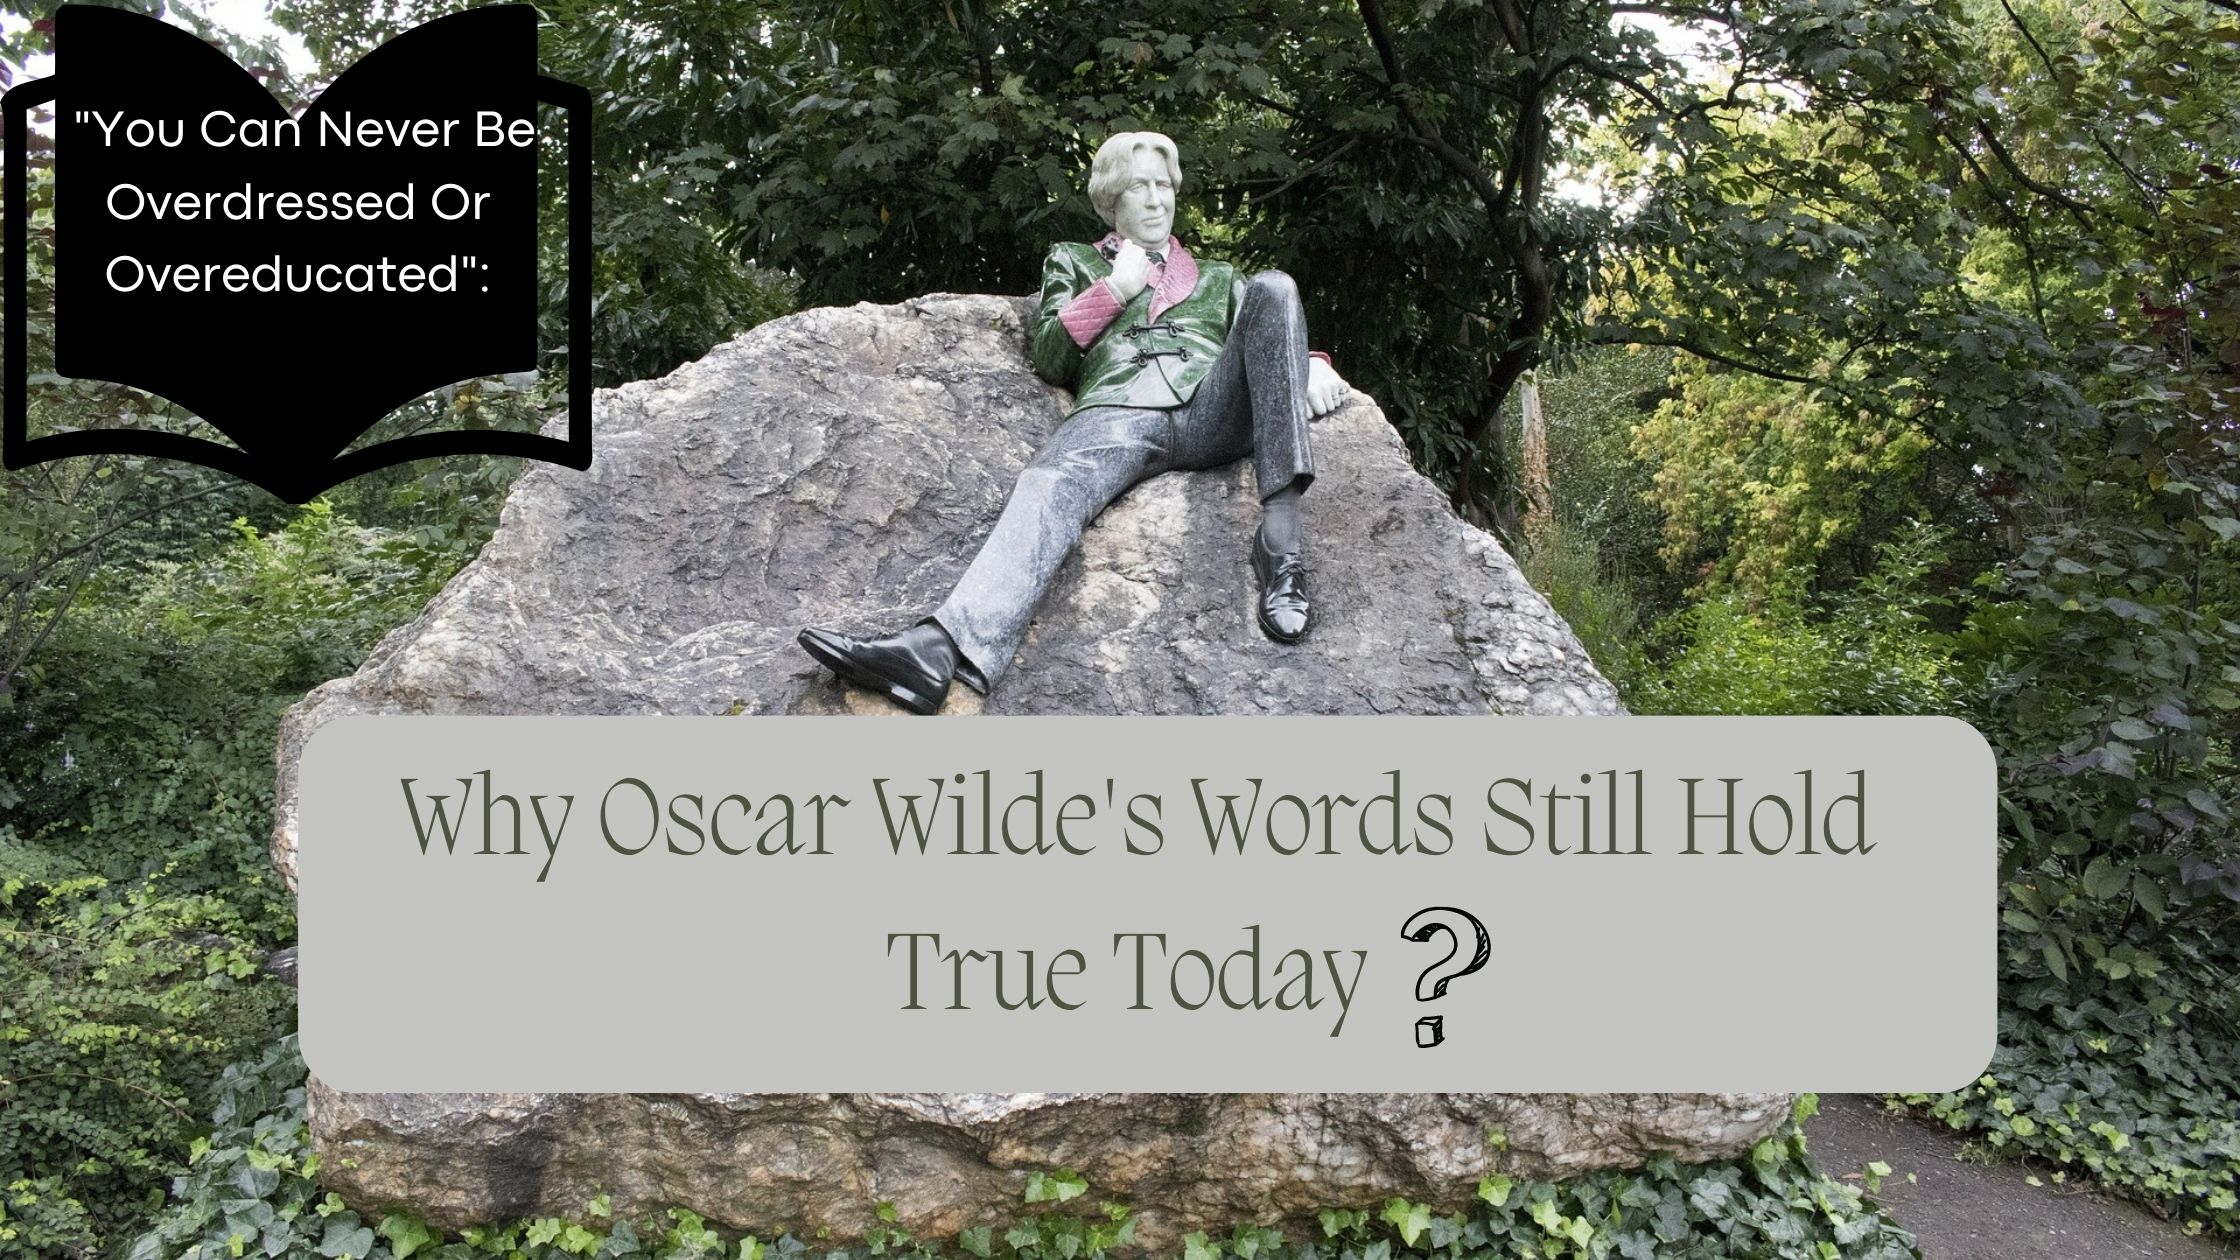 You Can Never Be Overdressed Or Overeducated:Why Oscar Wilde's Words Still Hold True Today?